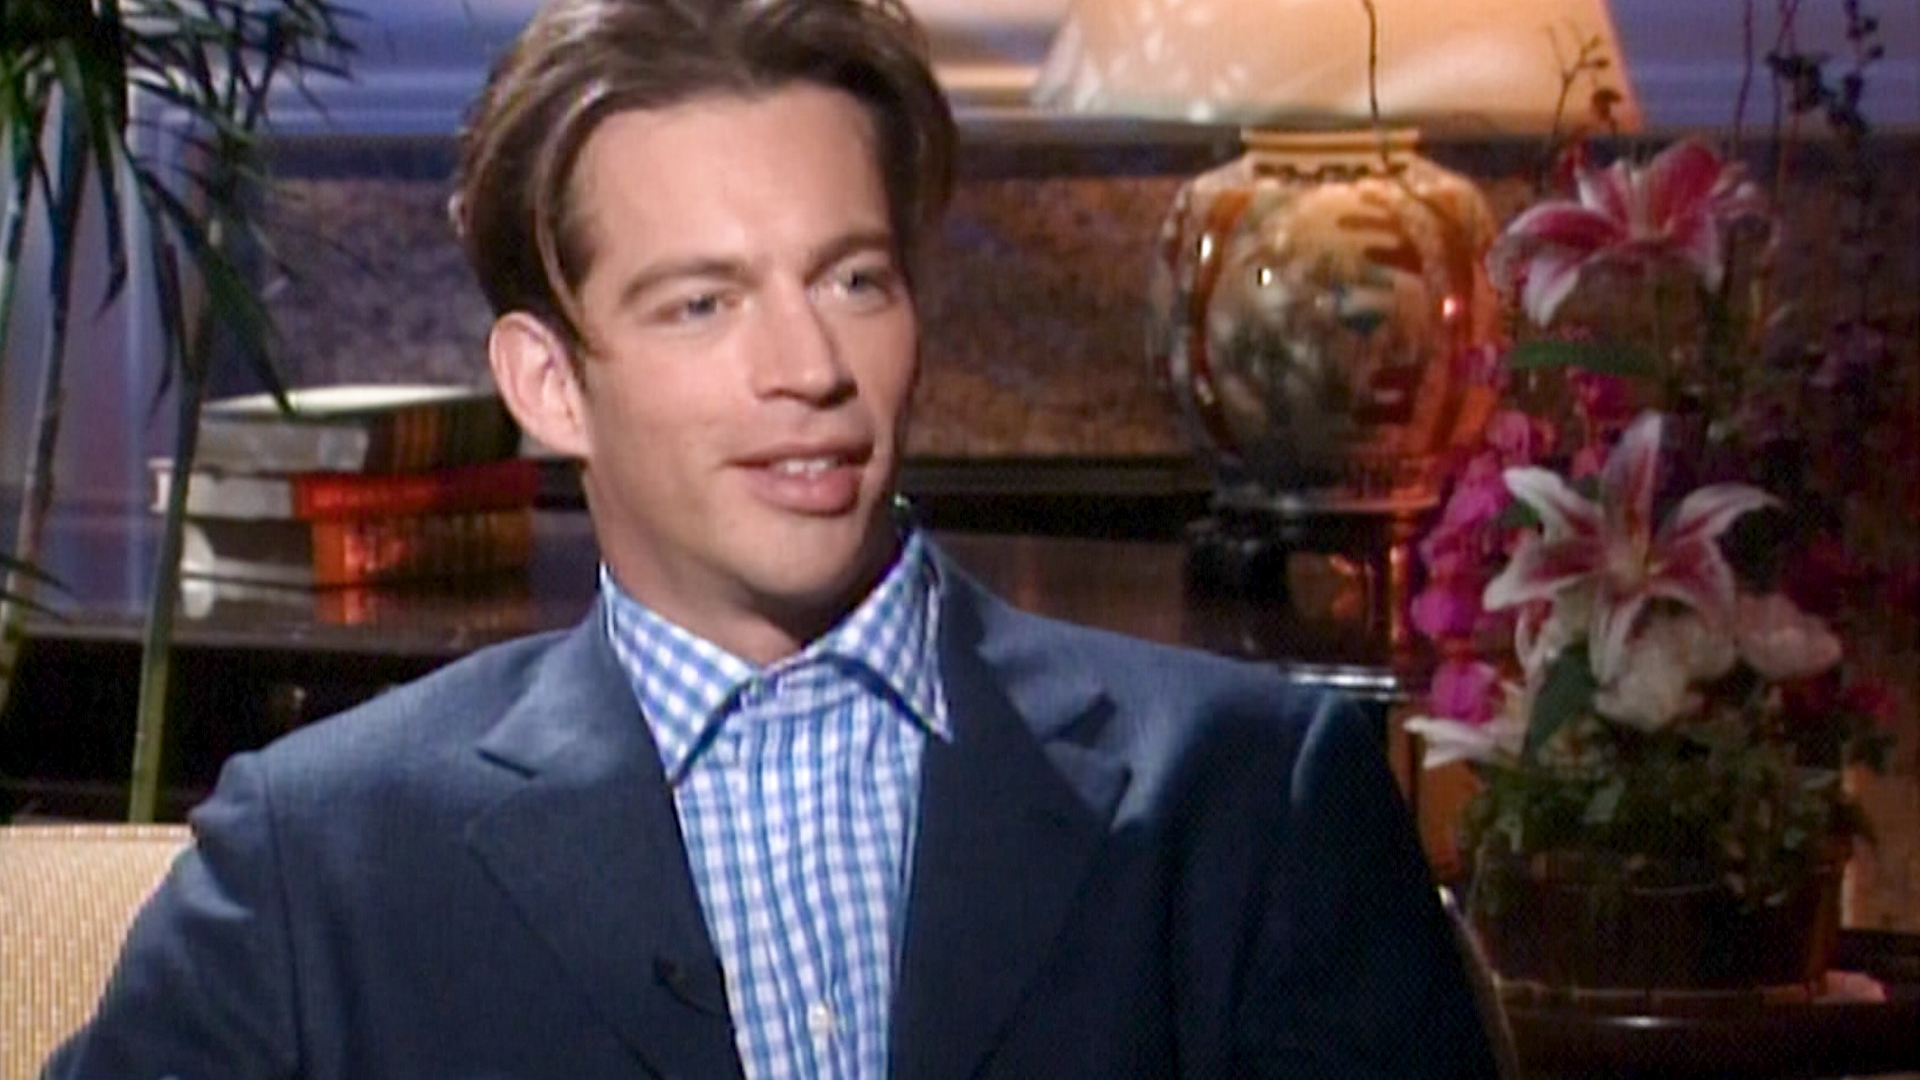 Harry Connick Jr. sat down with WFAA to talk about taking on the role of Justin Matisse in the 1998 film Hope Floats.